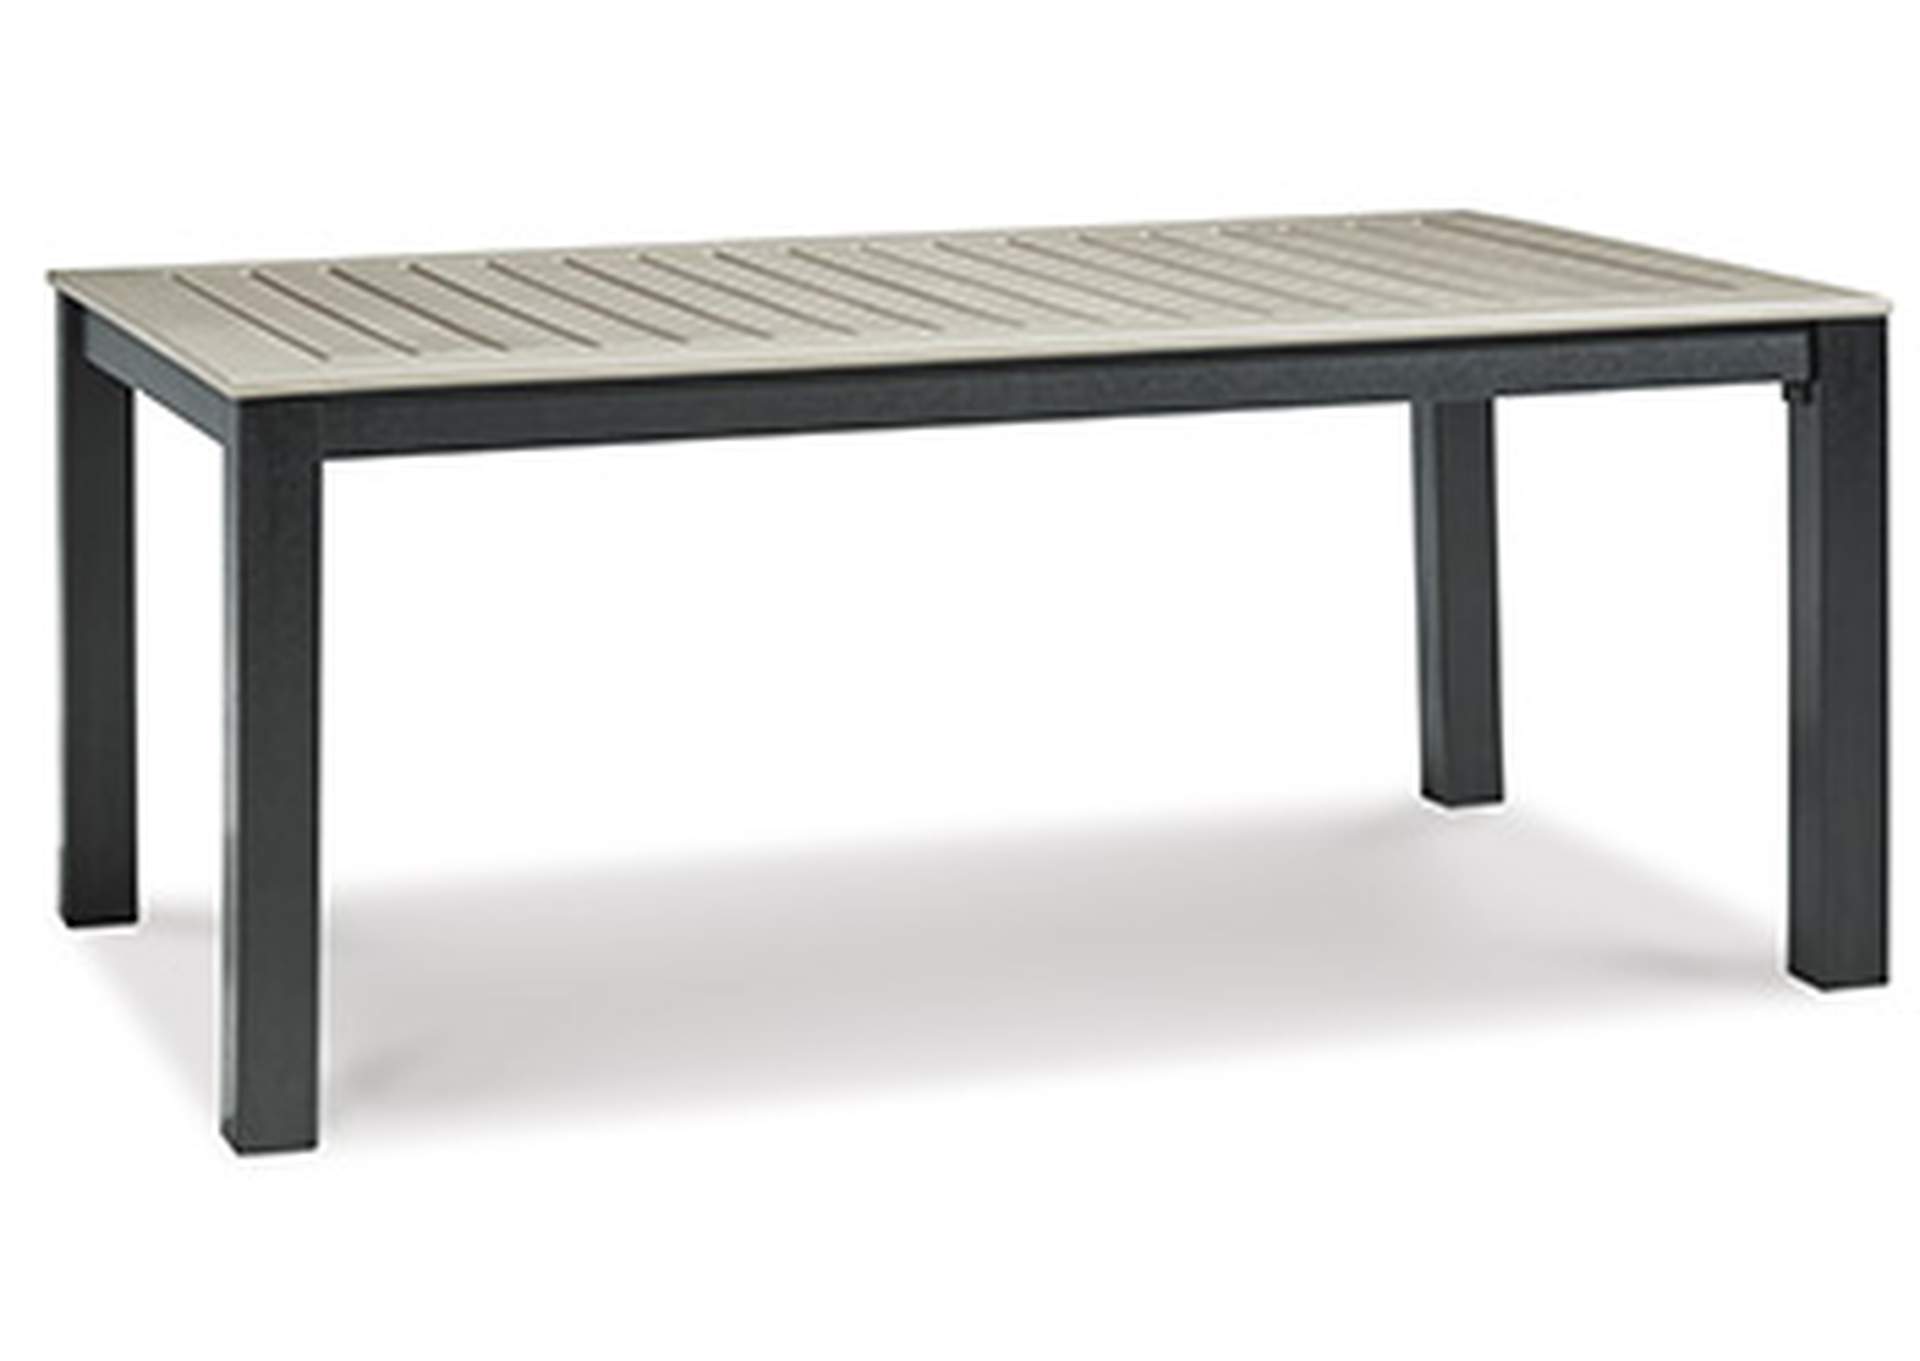 MOUNT VALLEY Outdoor Dining Table,Outdoor By Ashley